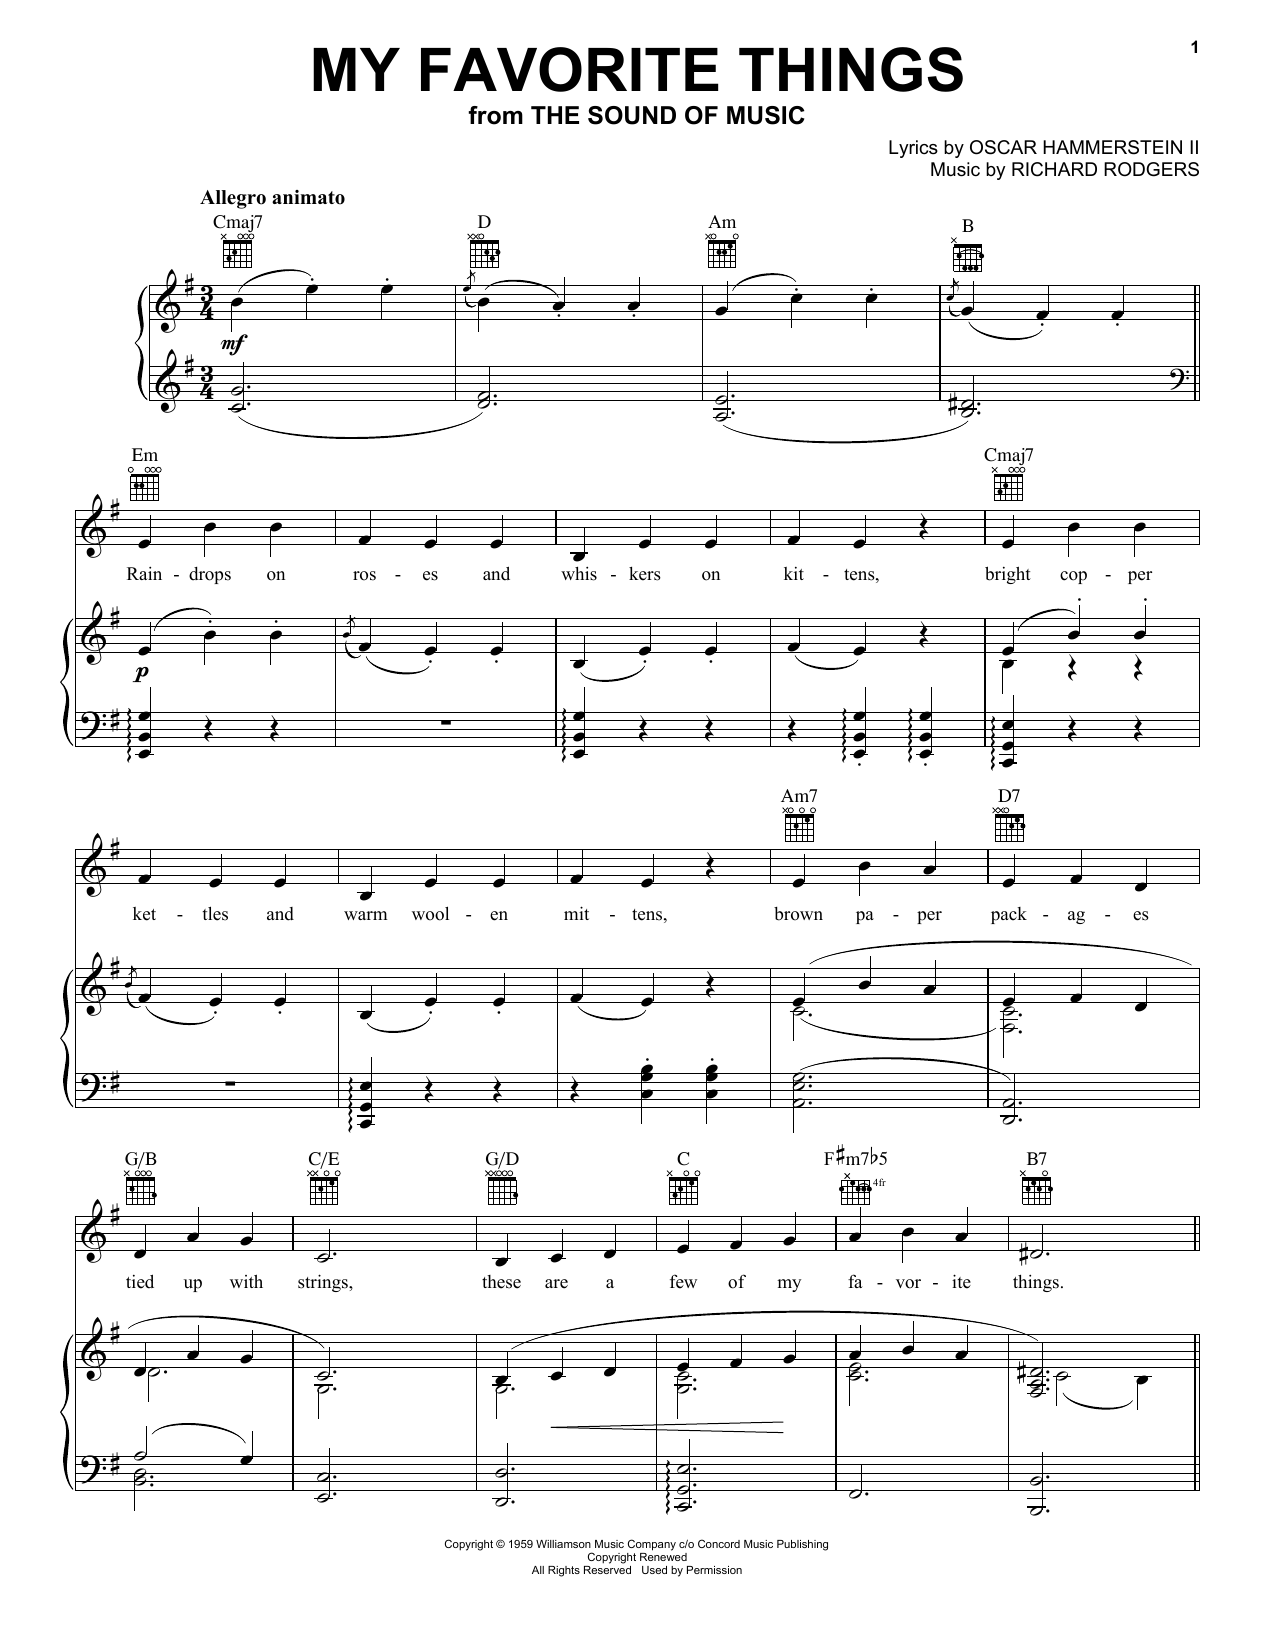 Rodgers & Hammerstein My Favorite Things sheet music notes and chords. Download Printable PDF.